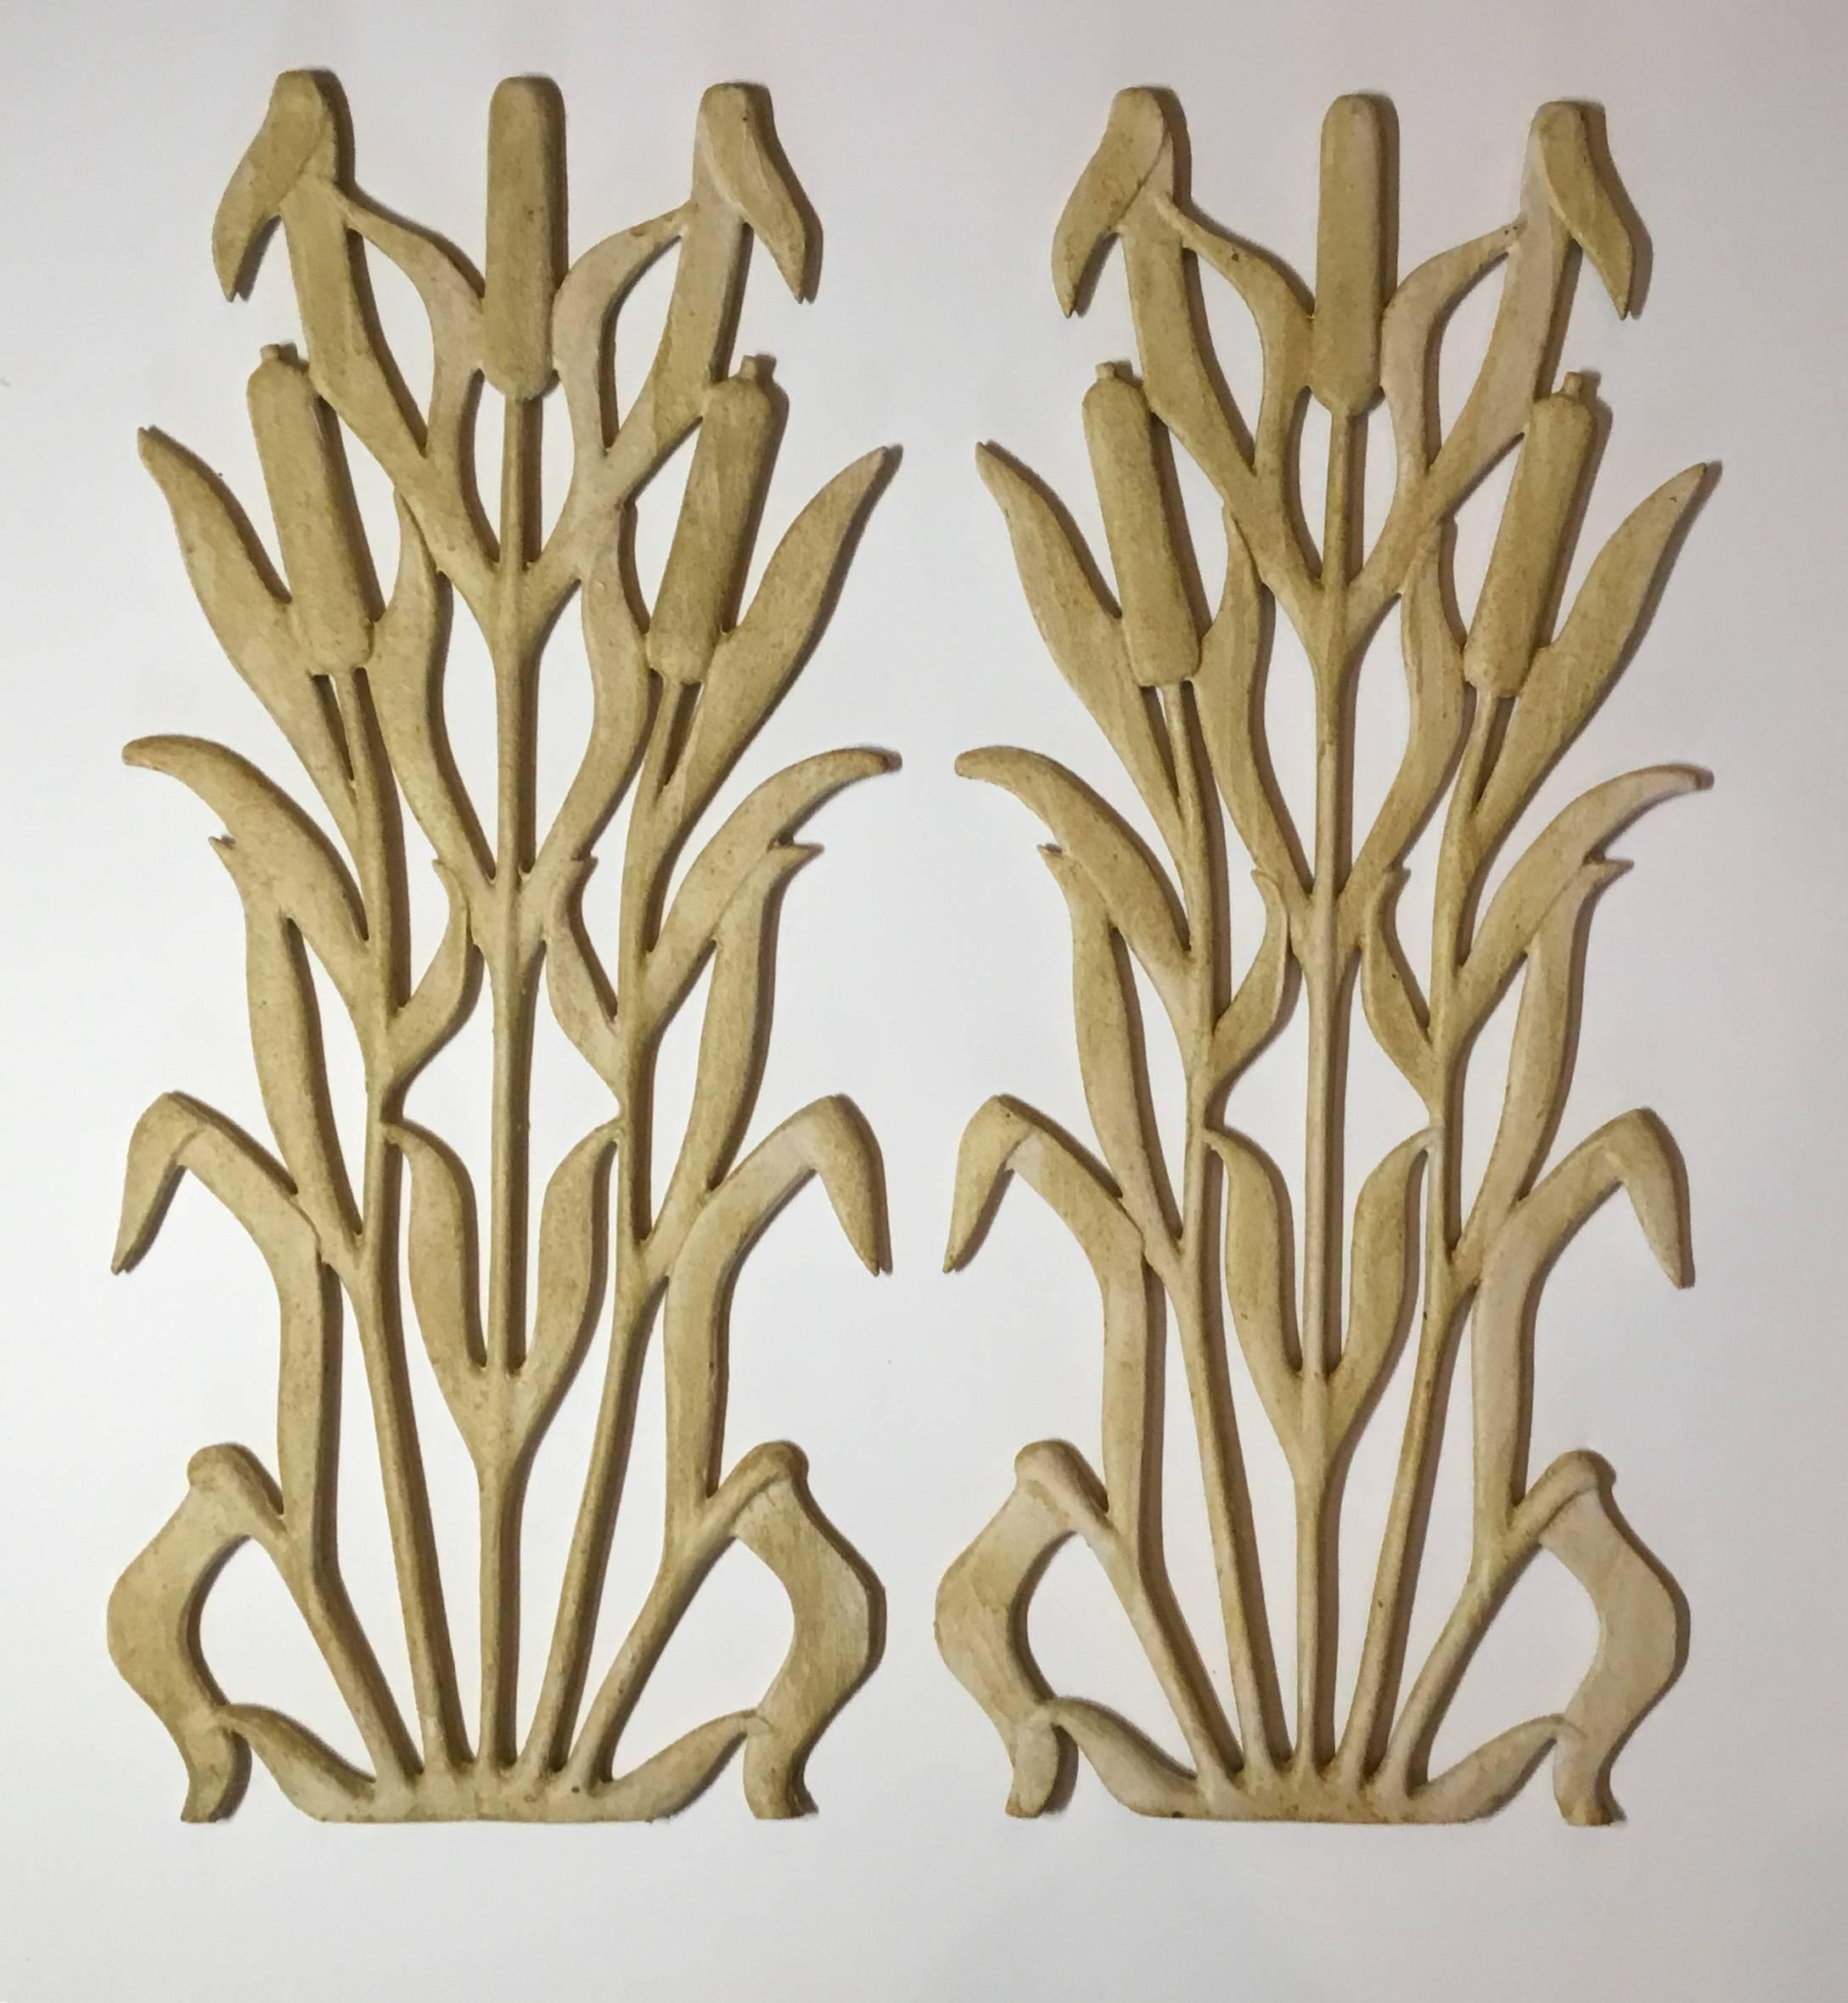 American Pair of Architectural Cast Iron Wall Hanging